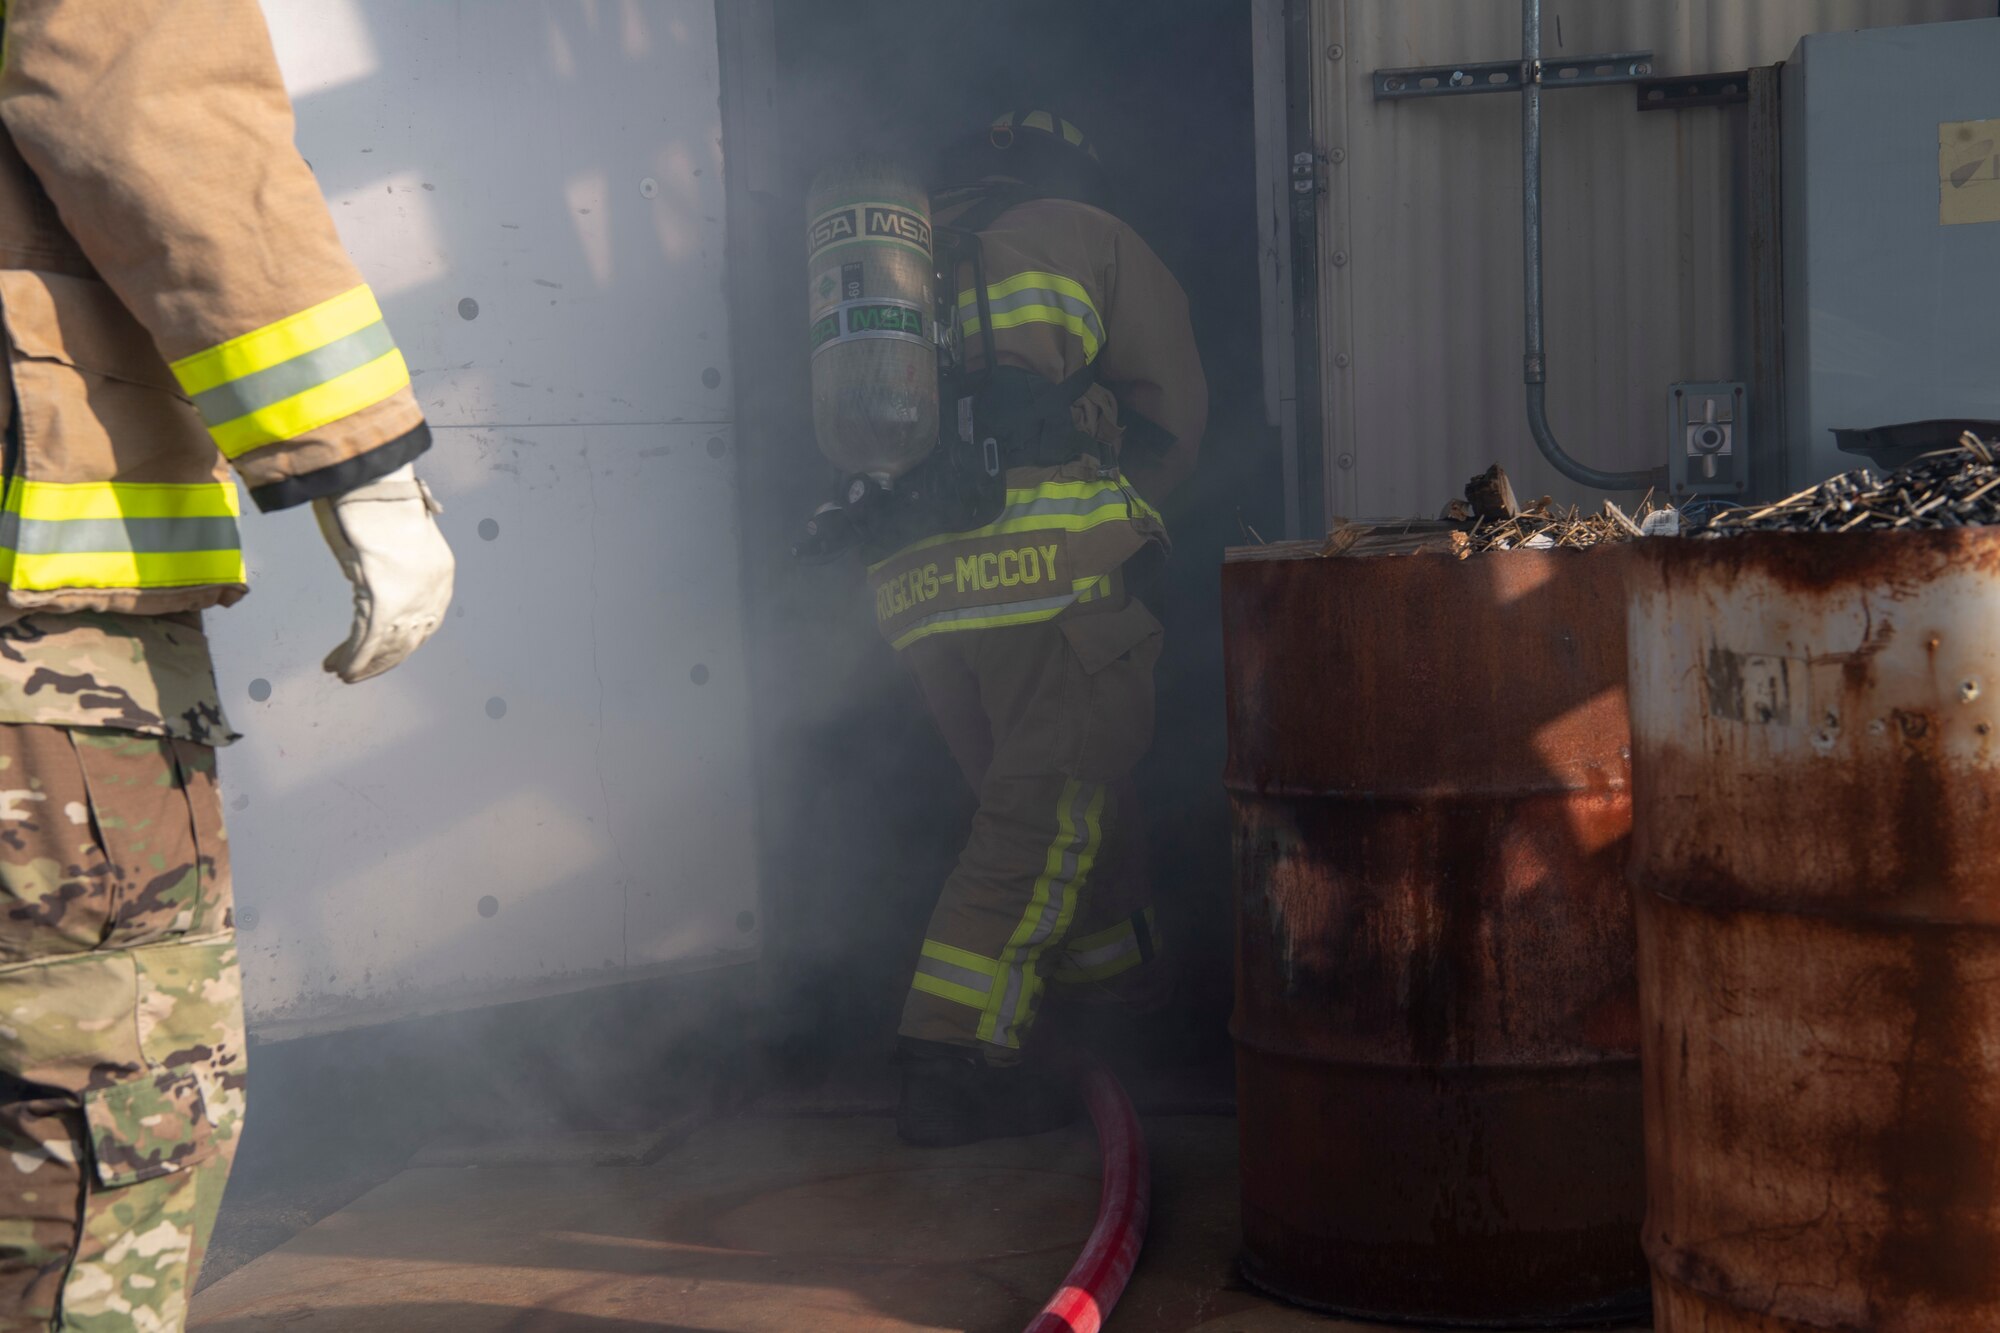 U.S. Air Force Senior Airman Kyler Rogers-McCoy, a 916th Civil Engineer Flight firefighter, makes re-entry into the building to regain contact with his crew on Seymour Johnson Air Force Base, North Carolina, Jan. 9, 2020. In a smoke-filled environment firefighters must maintain visual or voice contact with each other at all times. (U.S. Air Force photo by Staff Sgt. Mary McKnight)